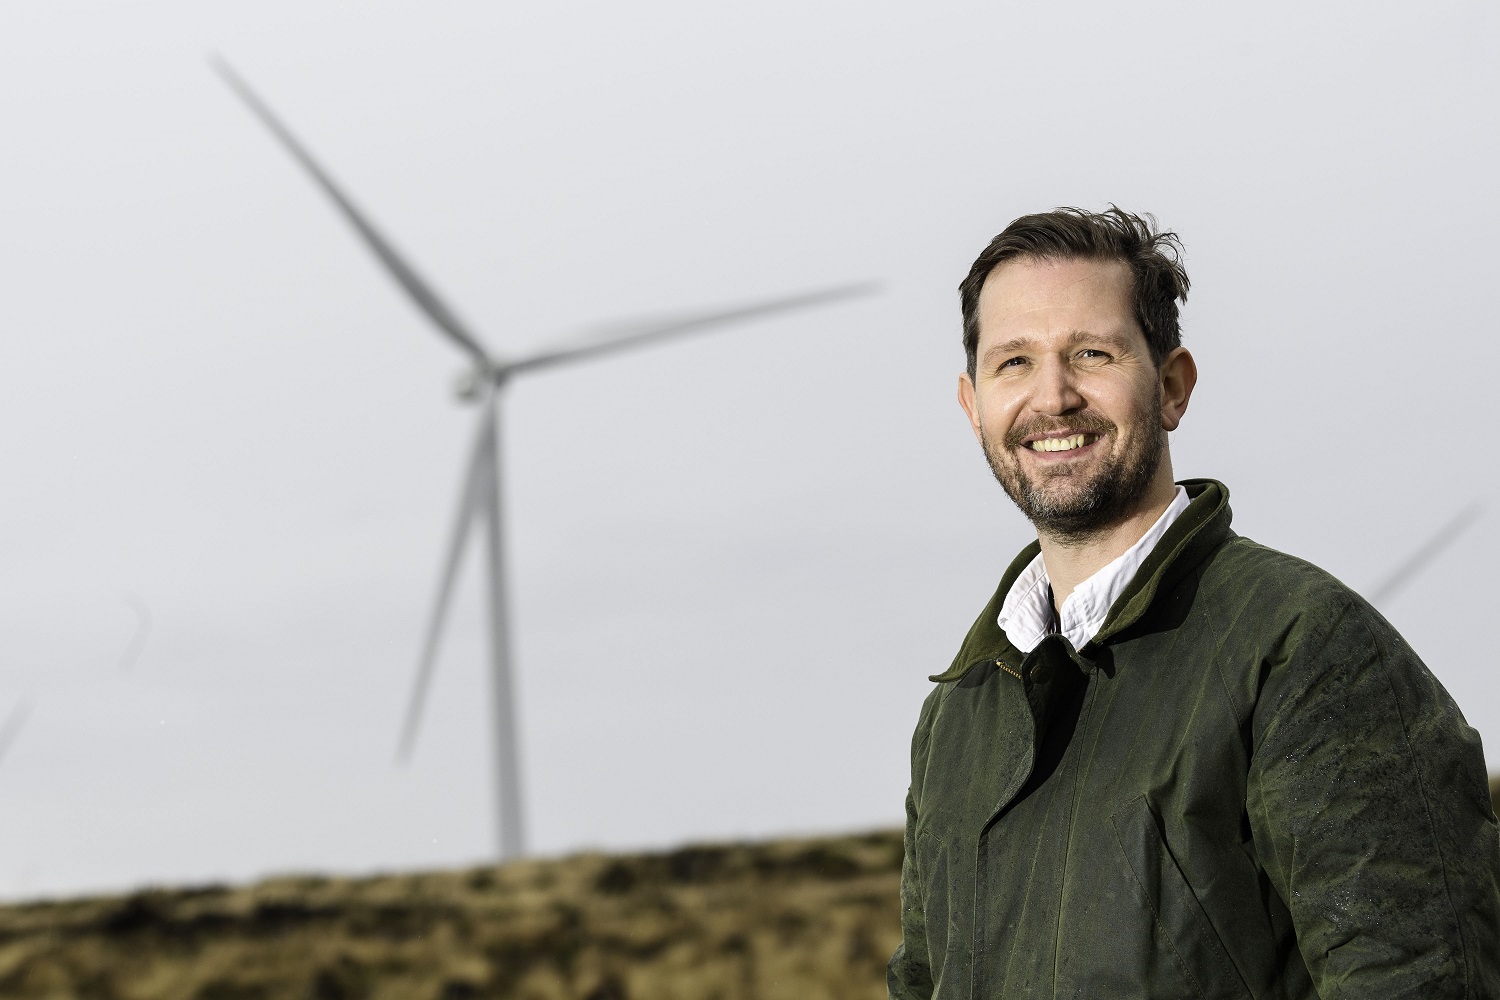 Bodinglee wind farm proposals to help local communities save millions on energy bills